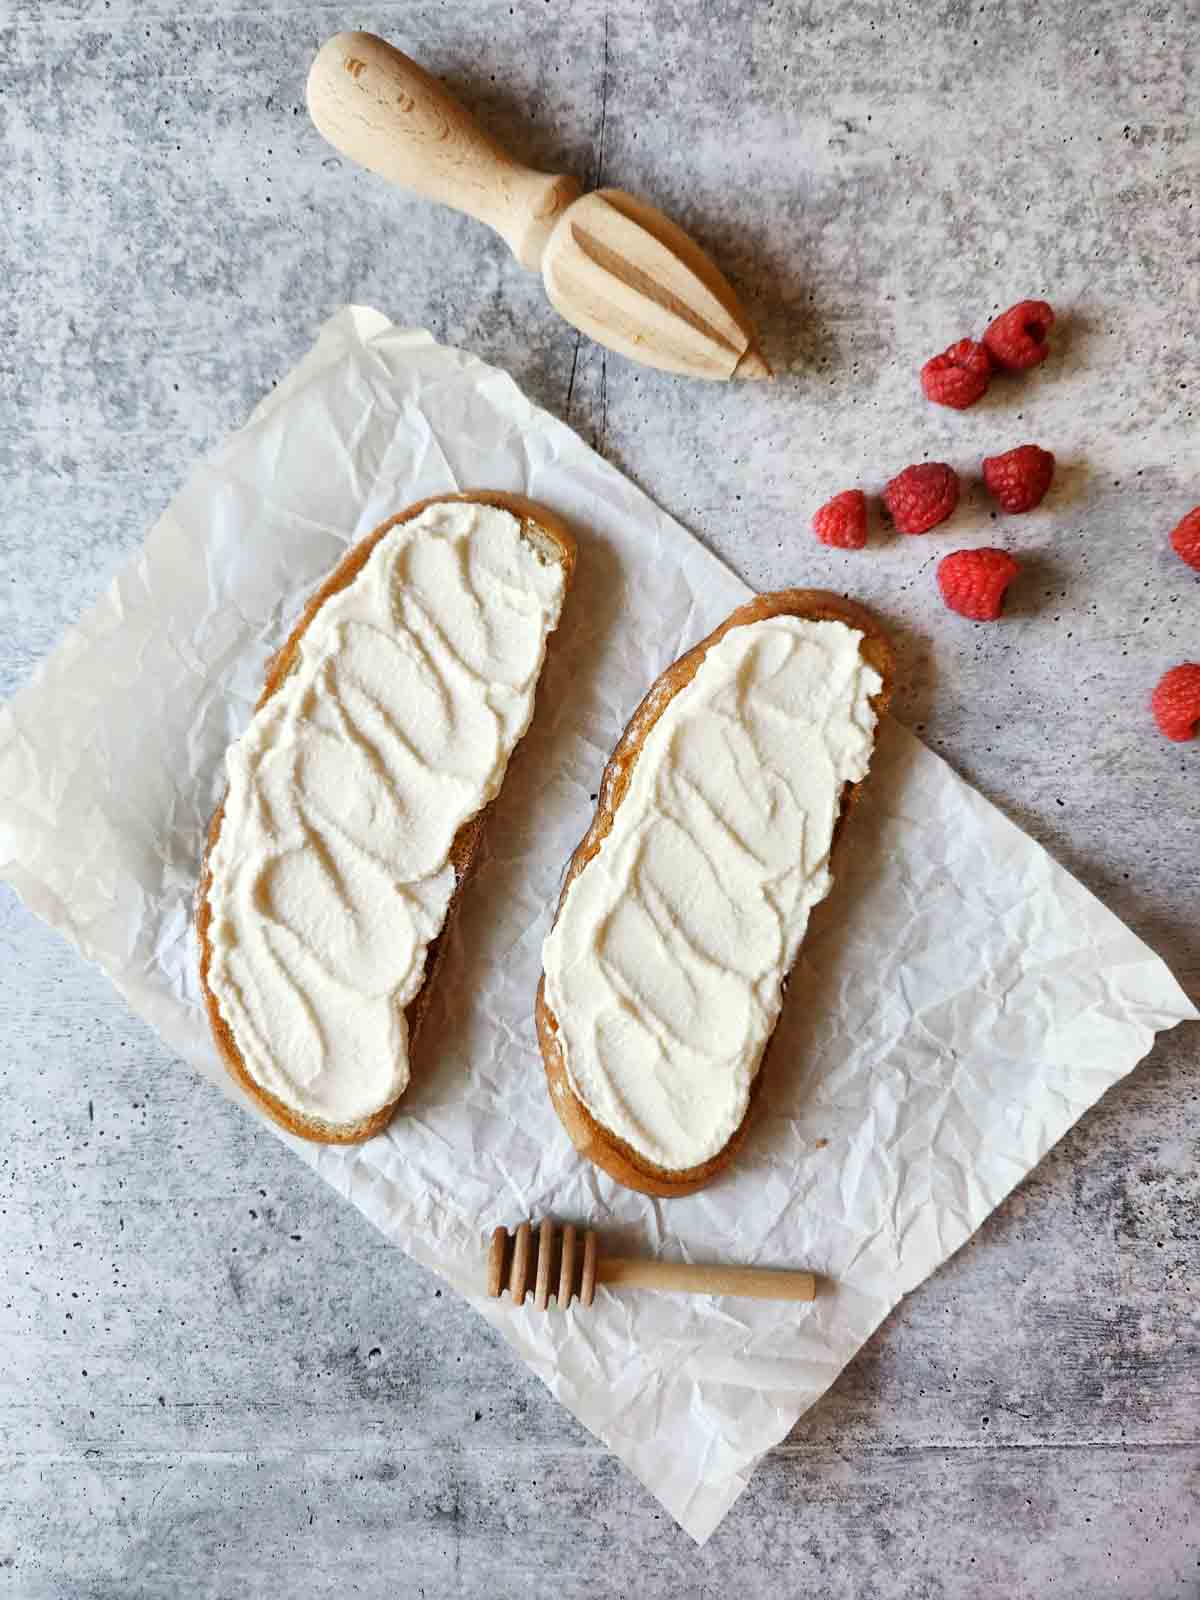 Two slices of toast with ricotta spread on parchment paper with raspberries on the side.